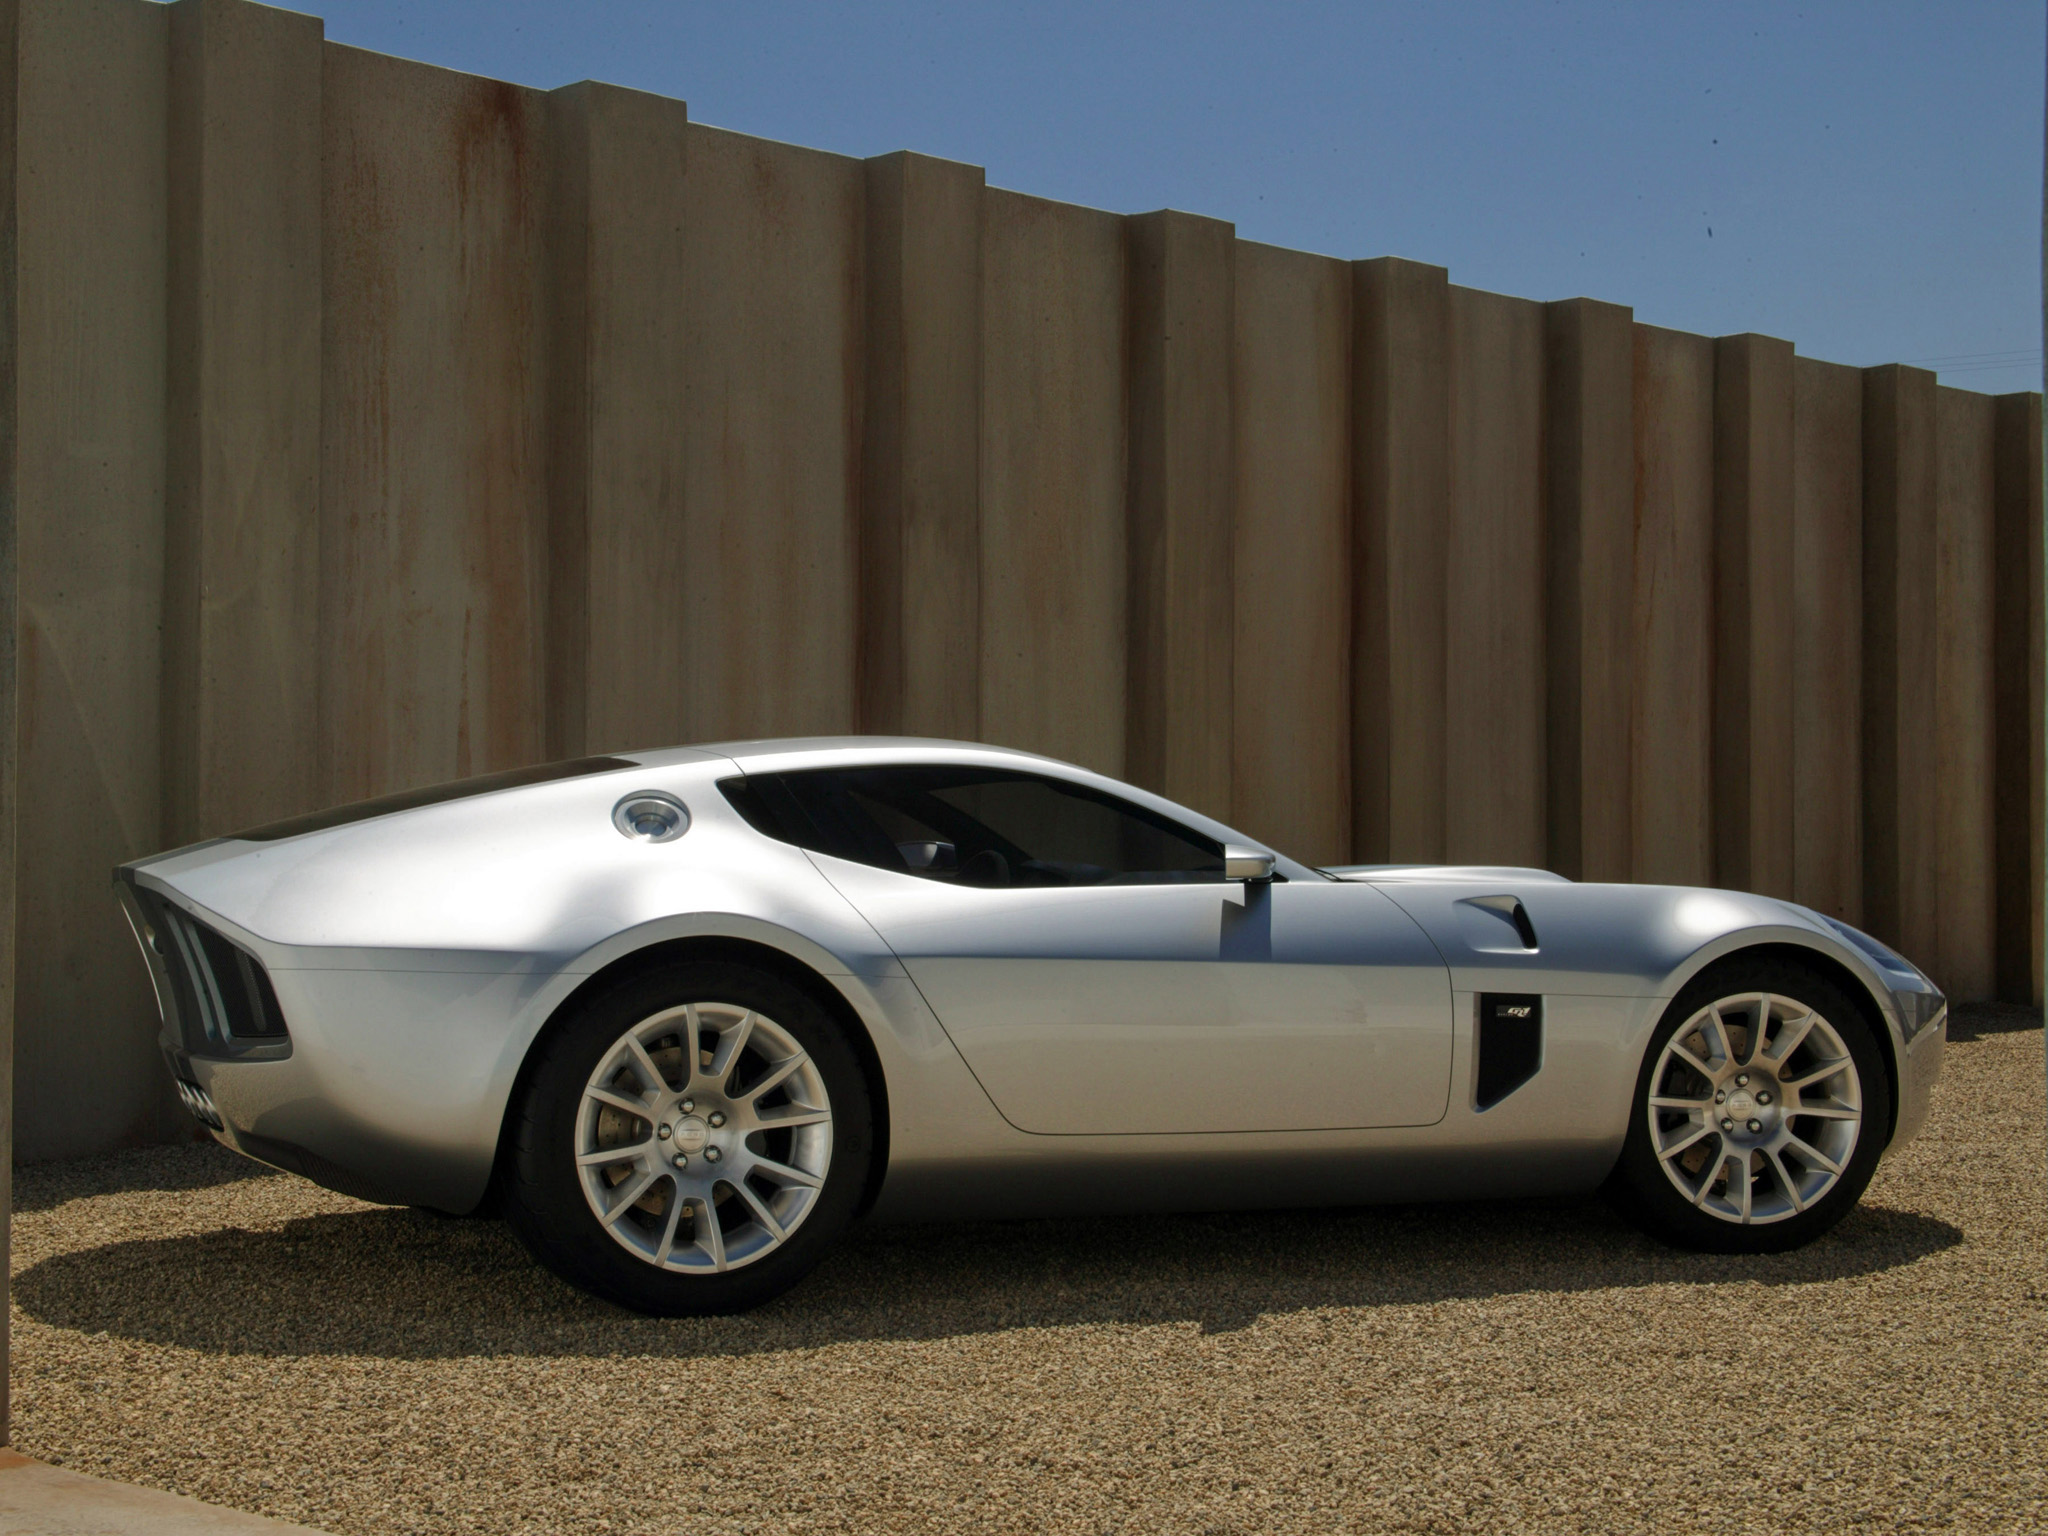 2005, Ford, Shelby, Gr 1, Concept, Supercar, Supercars Wallpaper